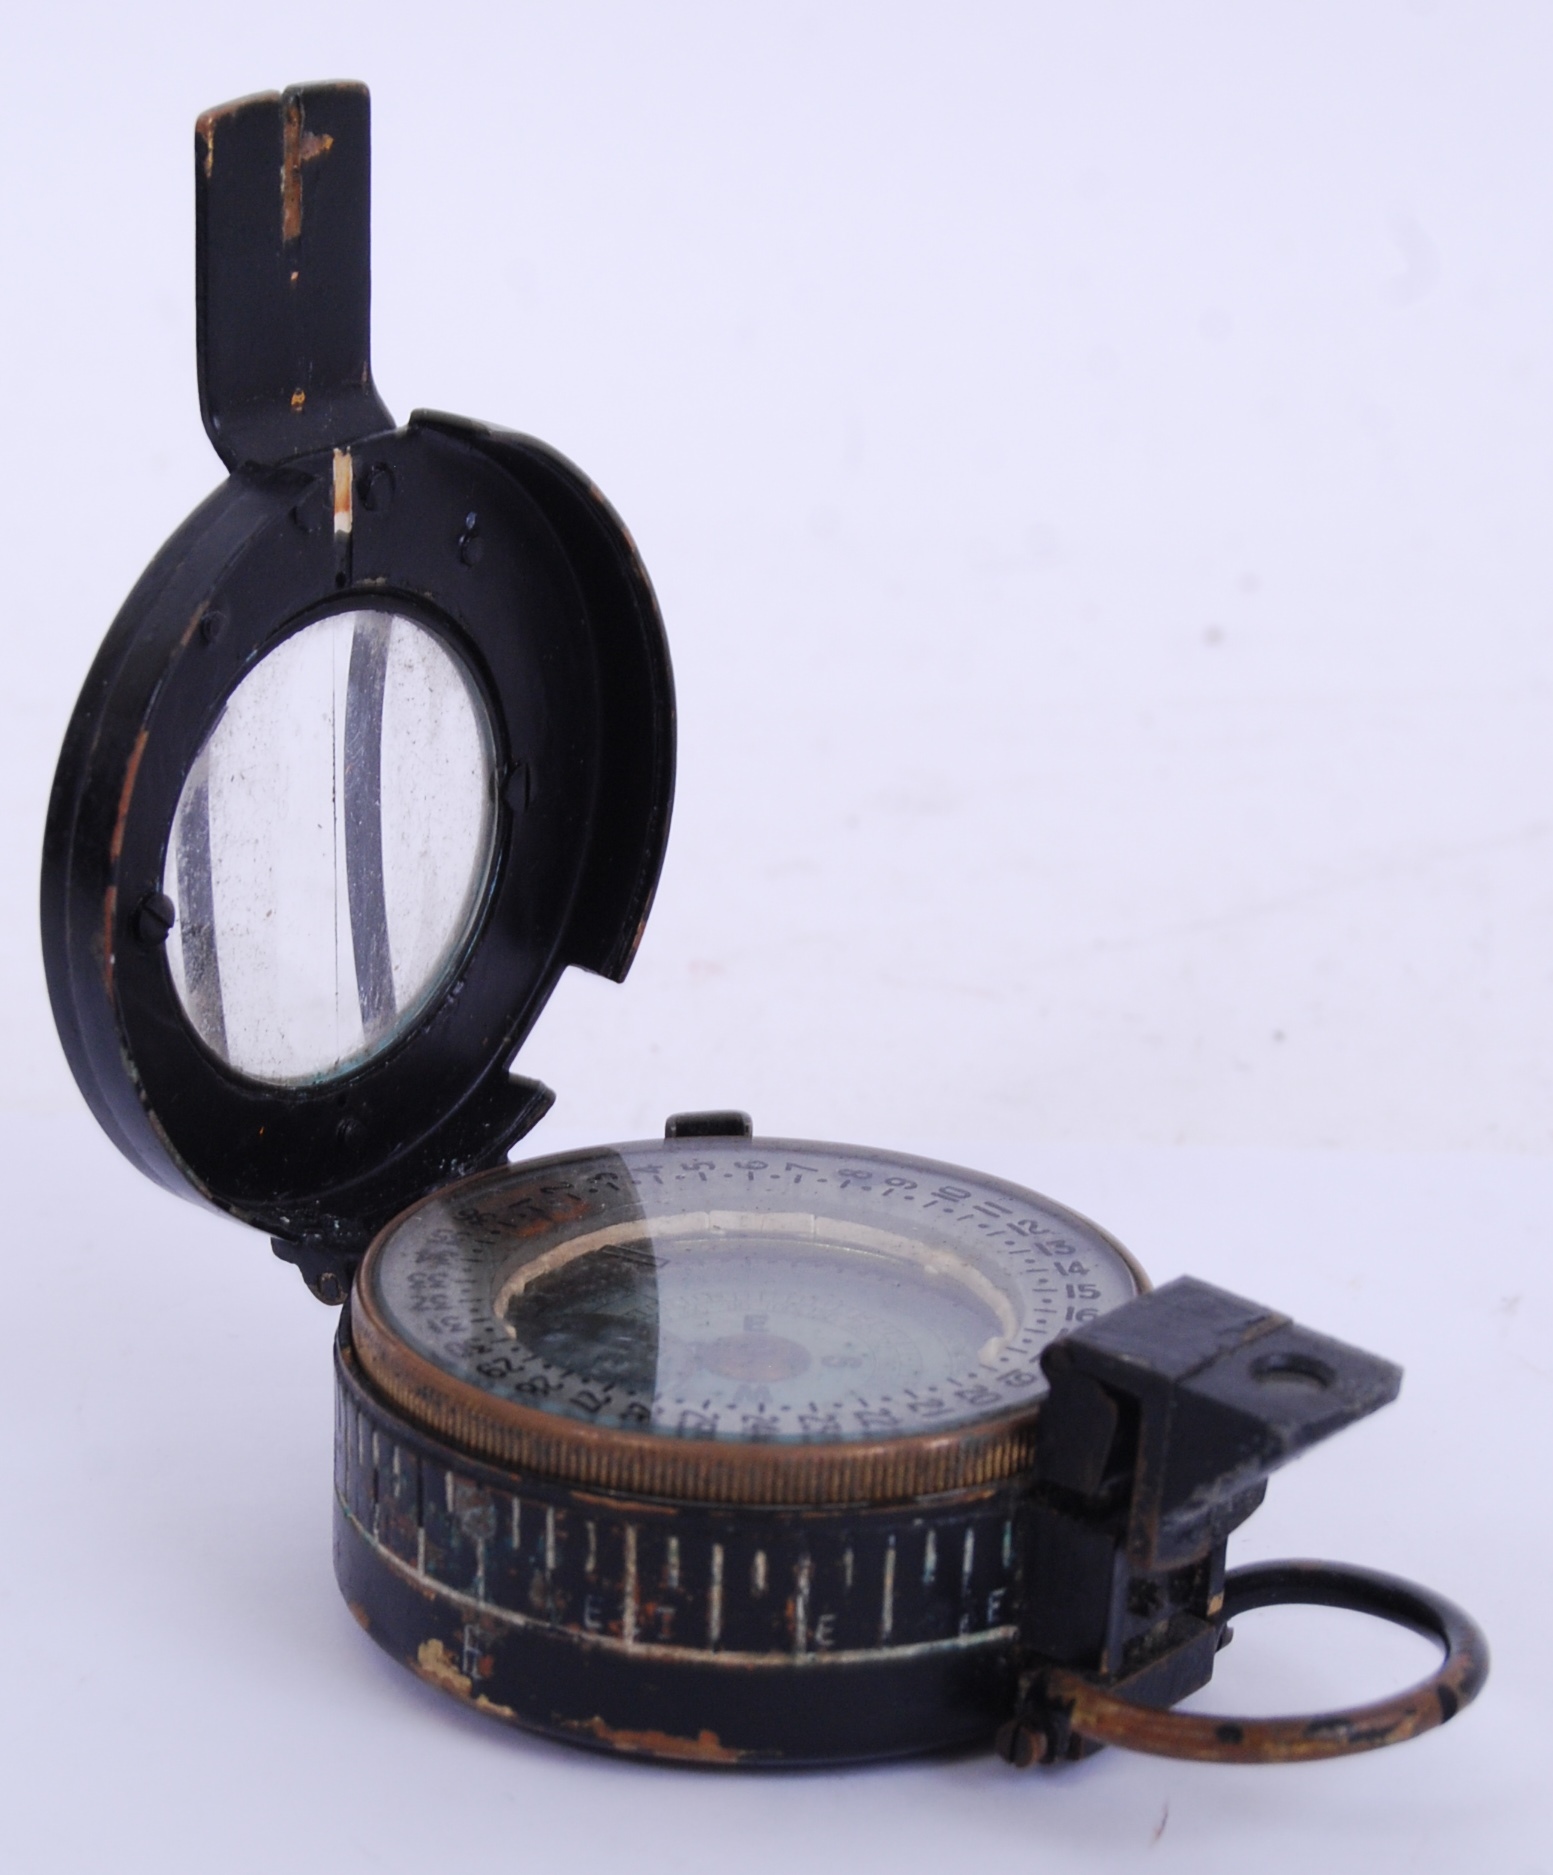 WWII COMPASS: A WWII Second World War era military issued TG&Co ' Mk III ' compass.